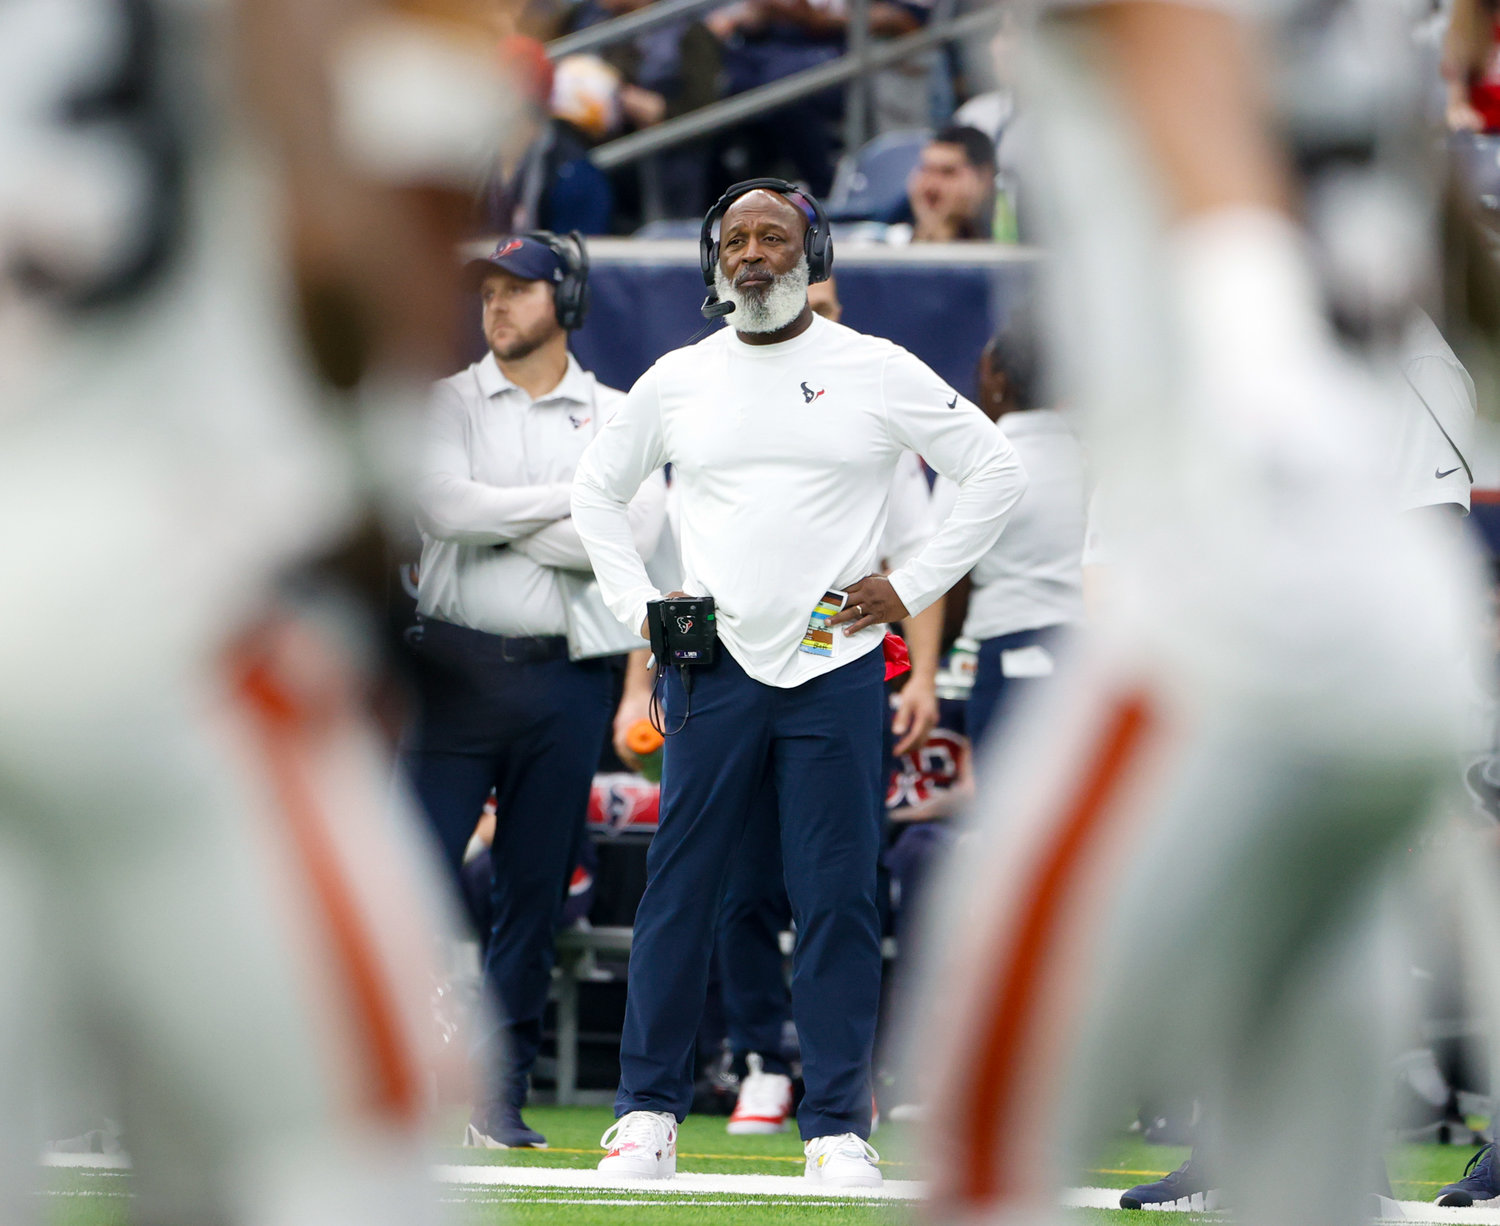 Houston Texans head coach Lovie Smith during an NFL game between the Houston Texans and the Cleveland Browns on Dec. 4, 2022, in Houston. The Browns won, 27-14.